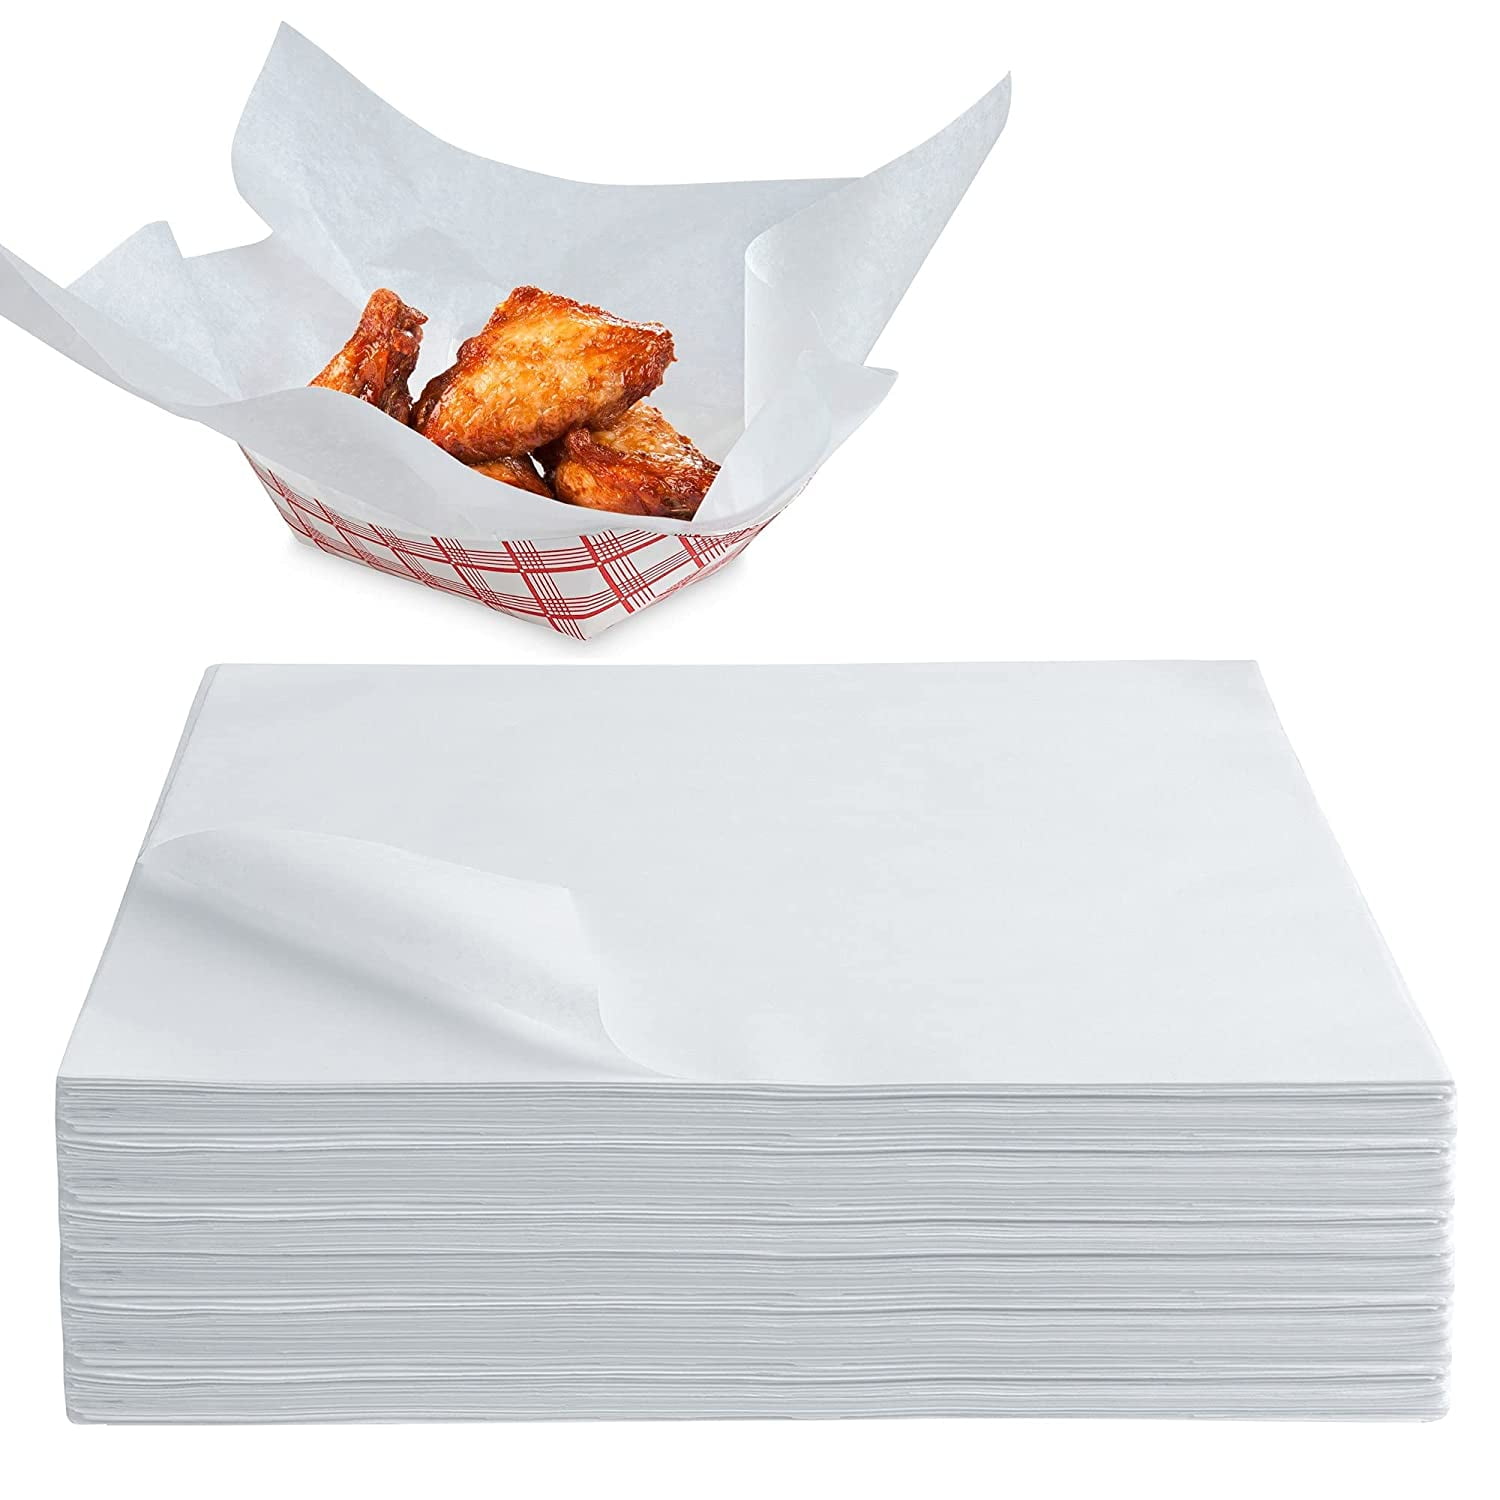 500 x White Paper Food Bags 12" x 12" Strung Sweets Fruit Sandwich 